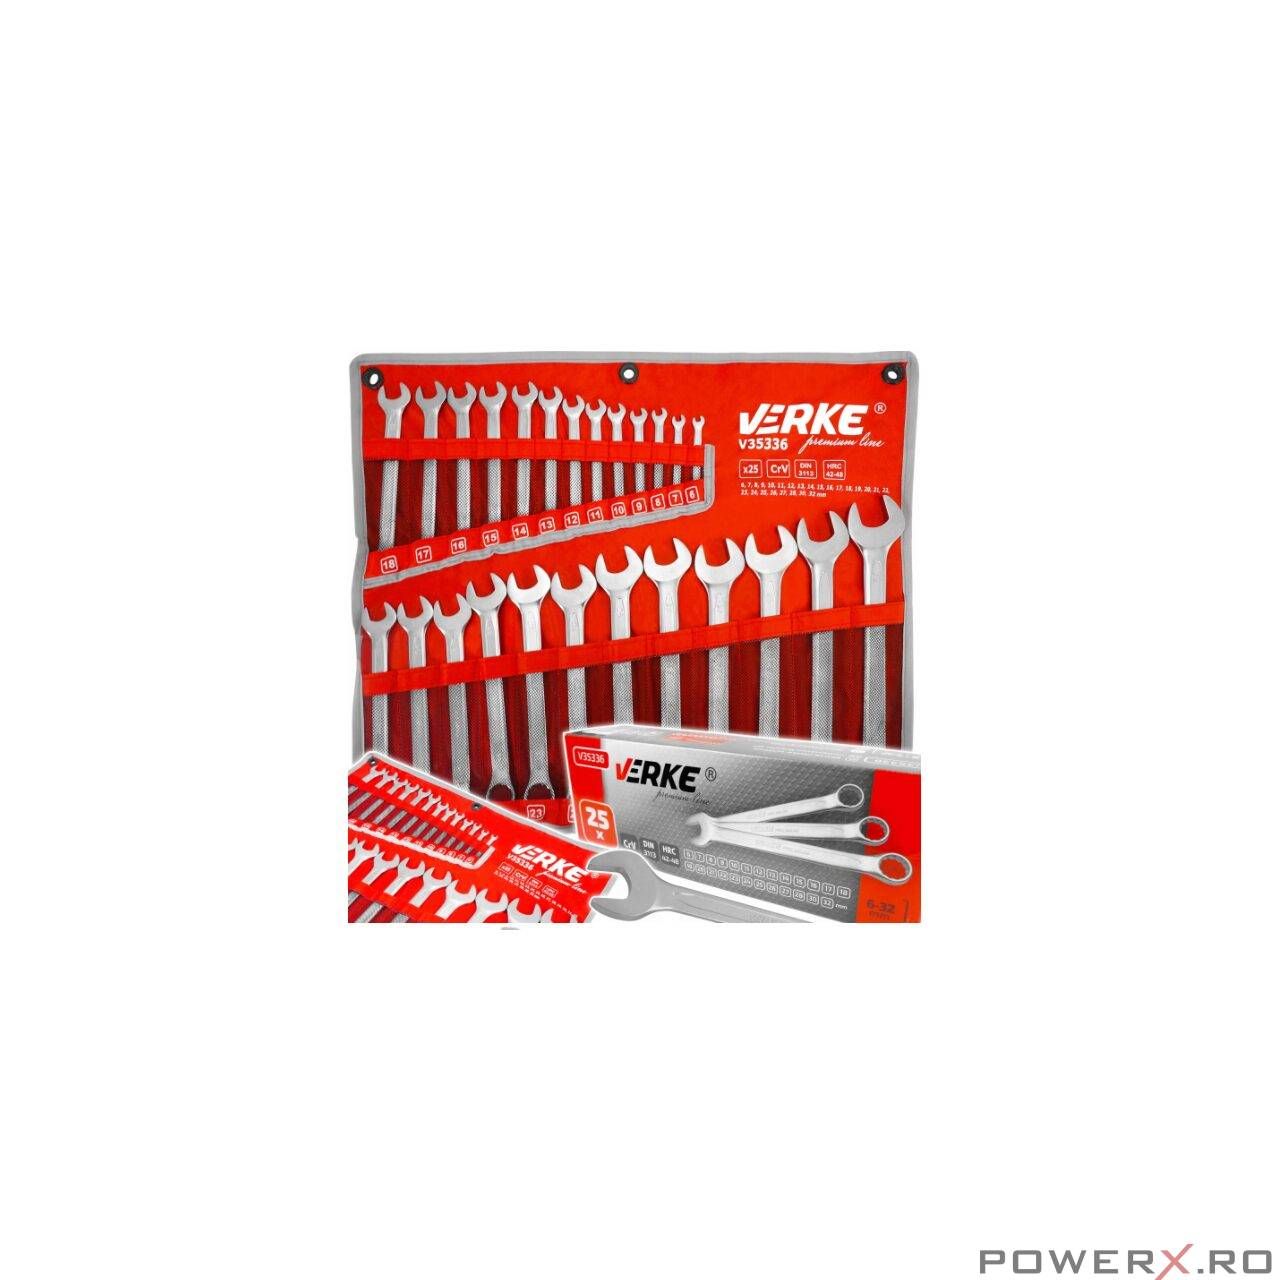 Set chei combinate fixe - inelare 25 piese profesionale, 6 - 32mm